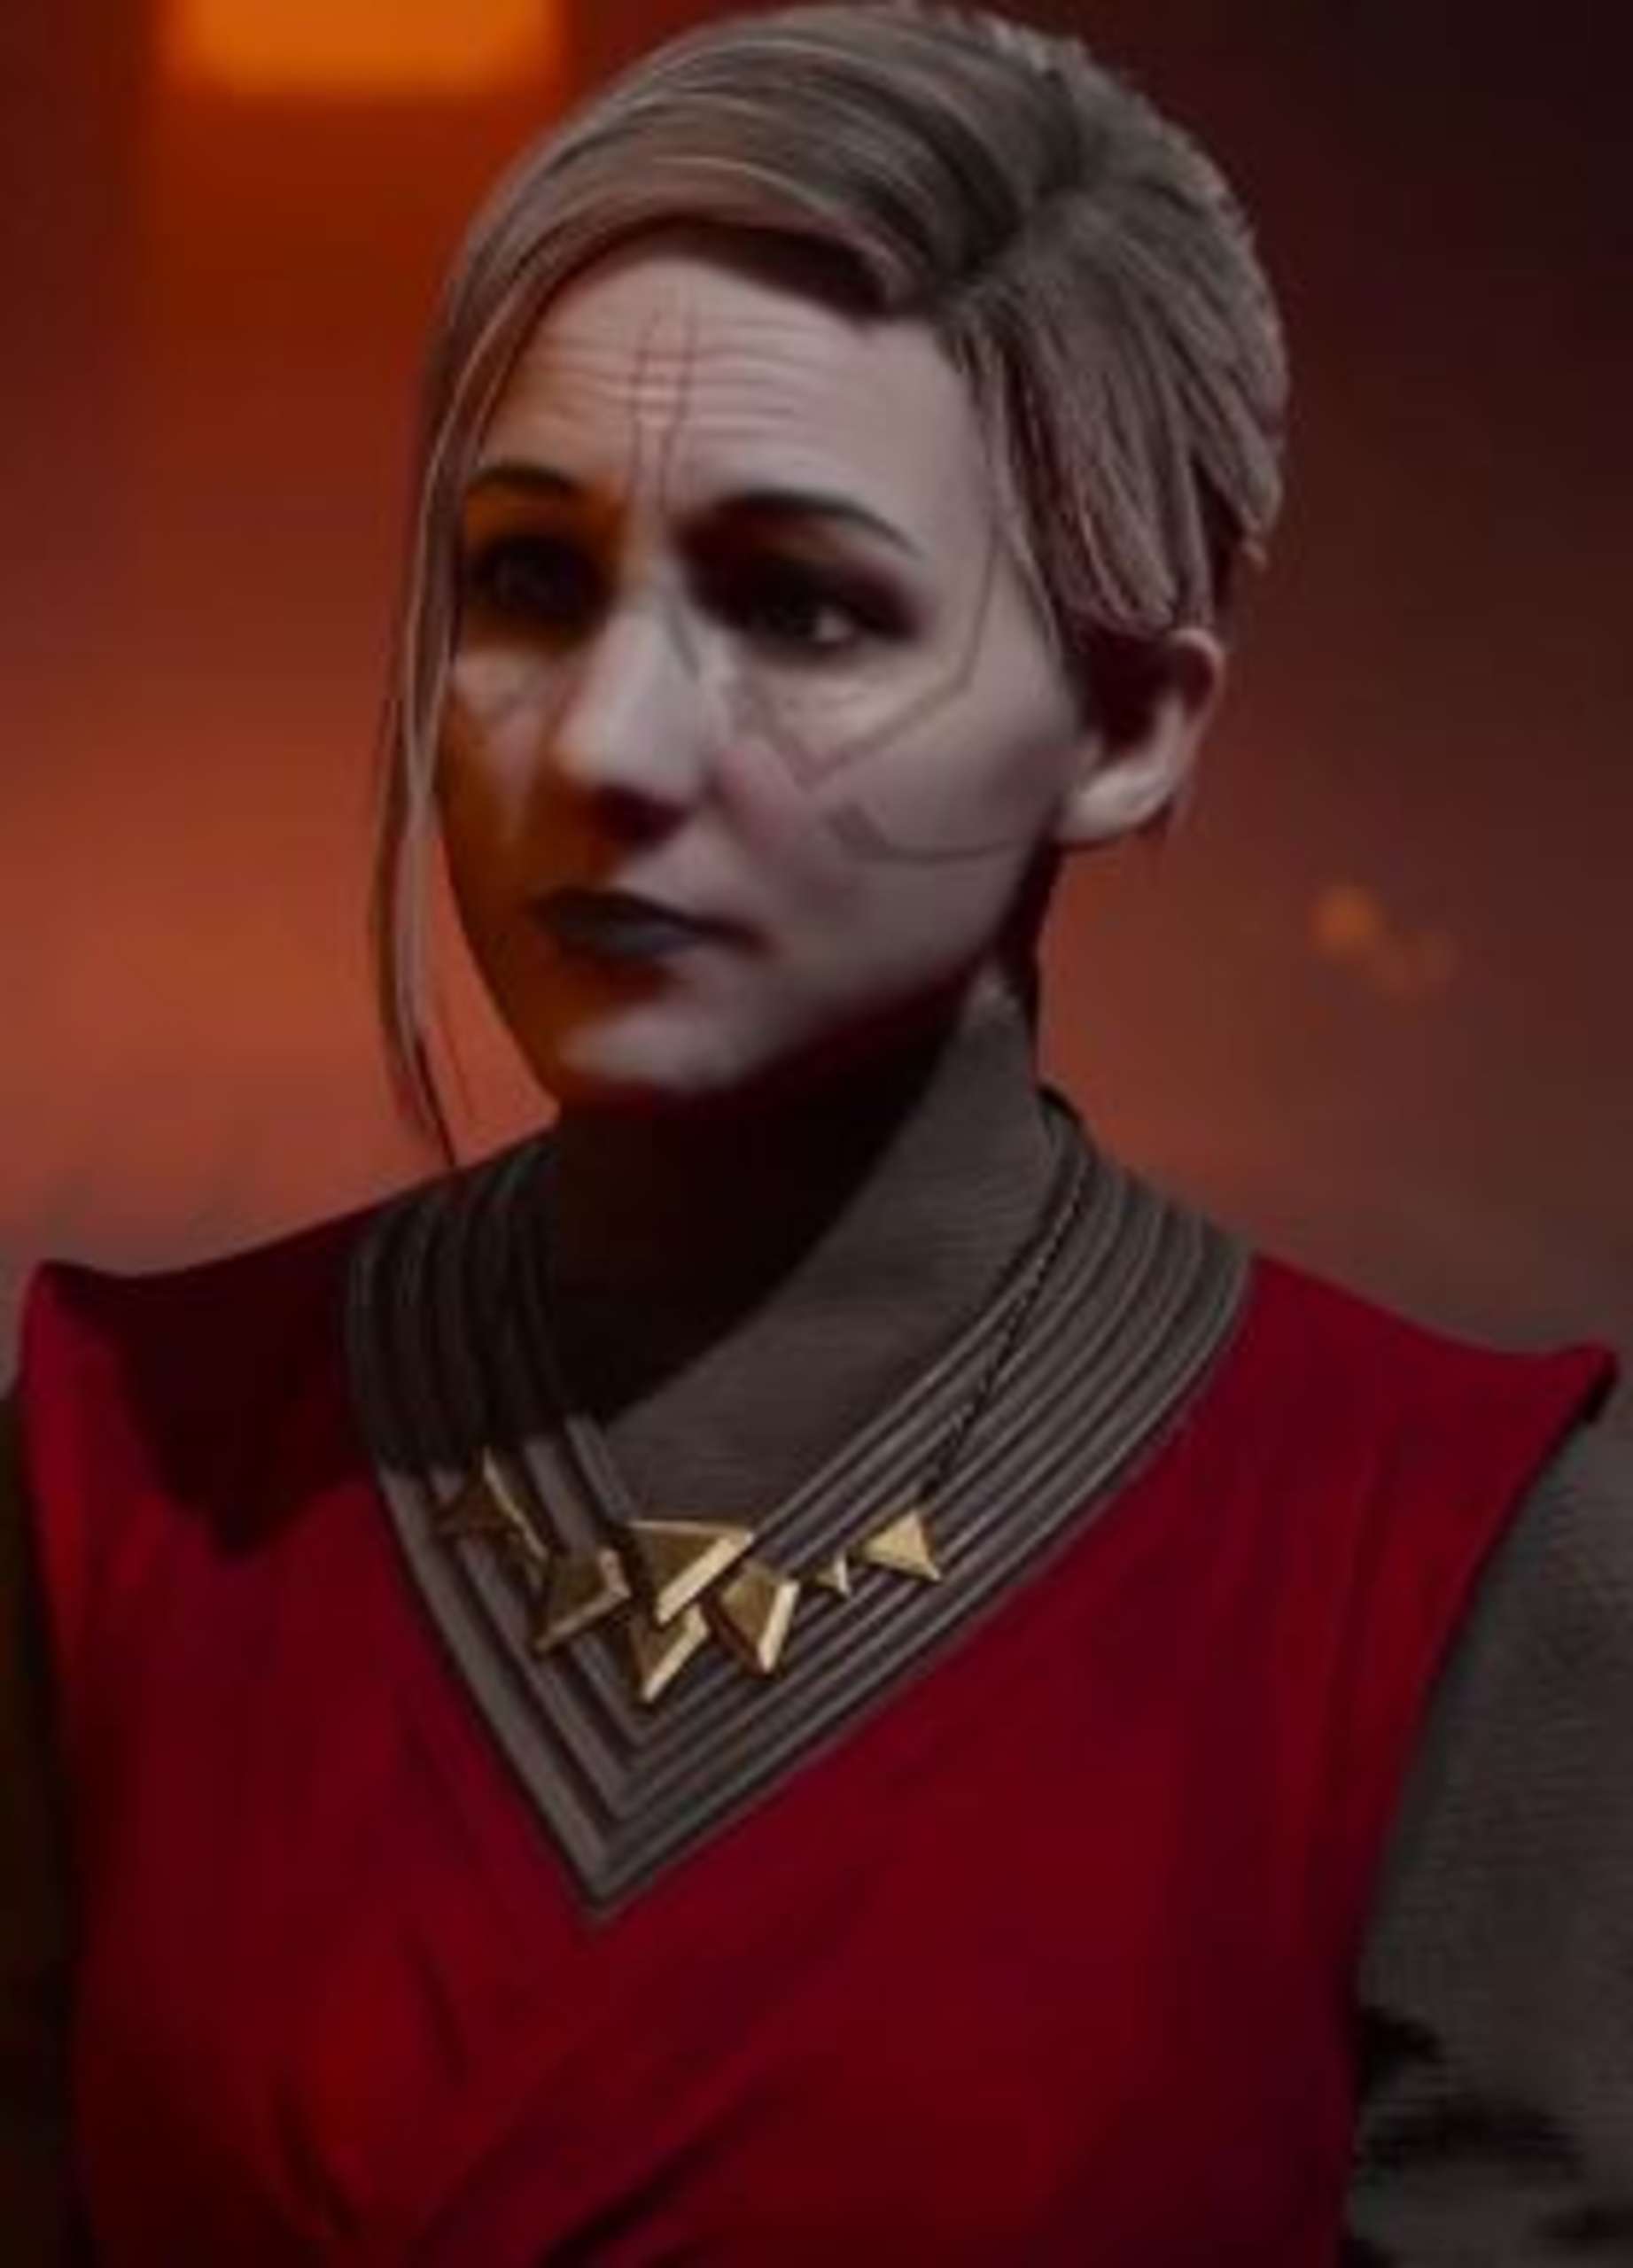 A Dedicated Player Of Star Wars Jedi Fallen Order Has Made A Series Of Costume Pictures Of Merrin, A Popular Nightsister Companion